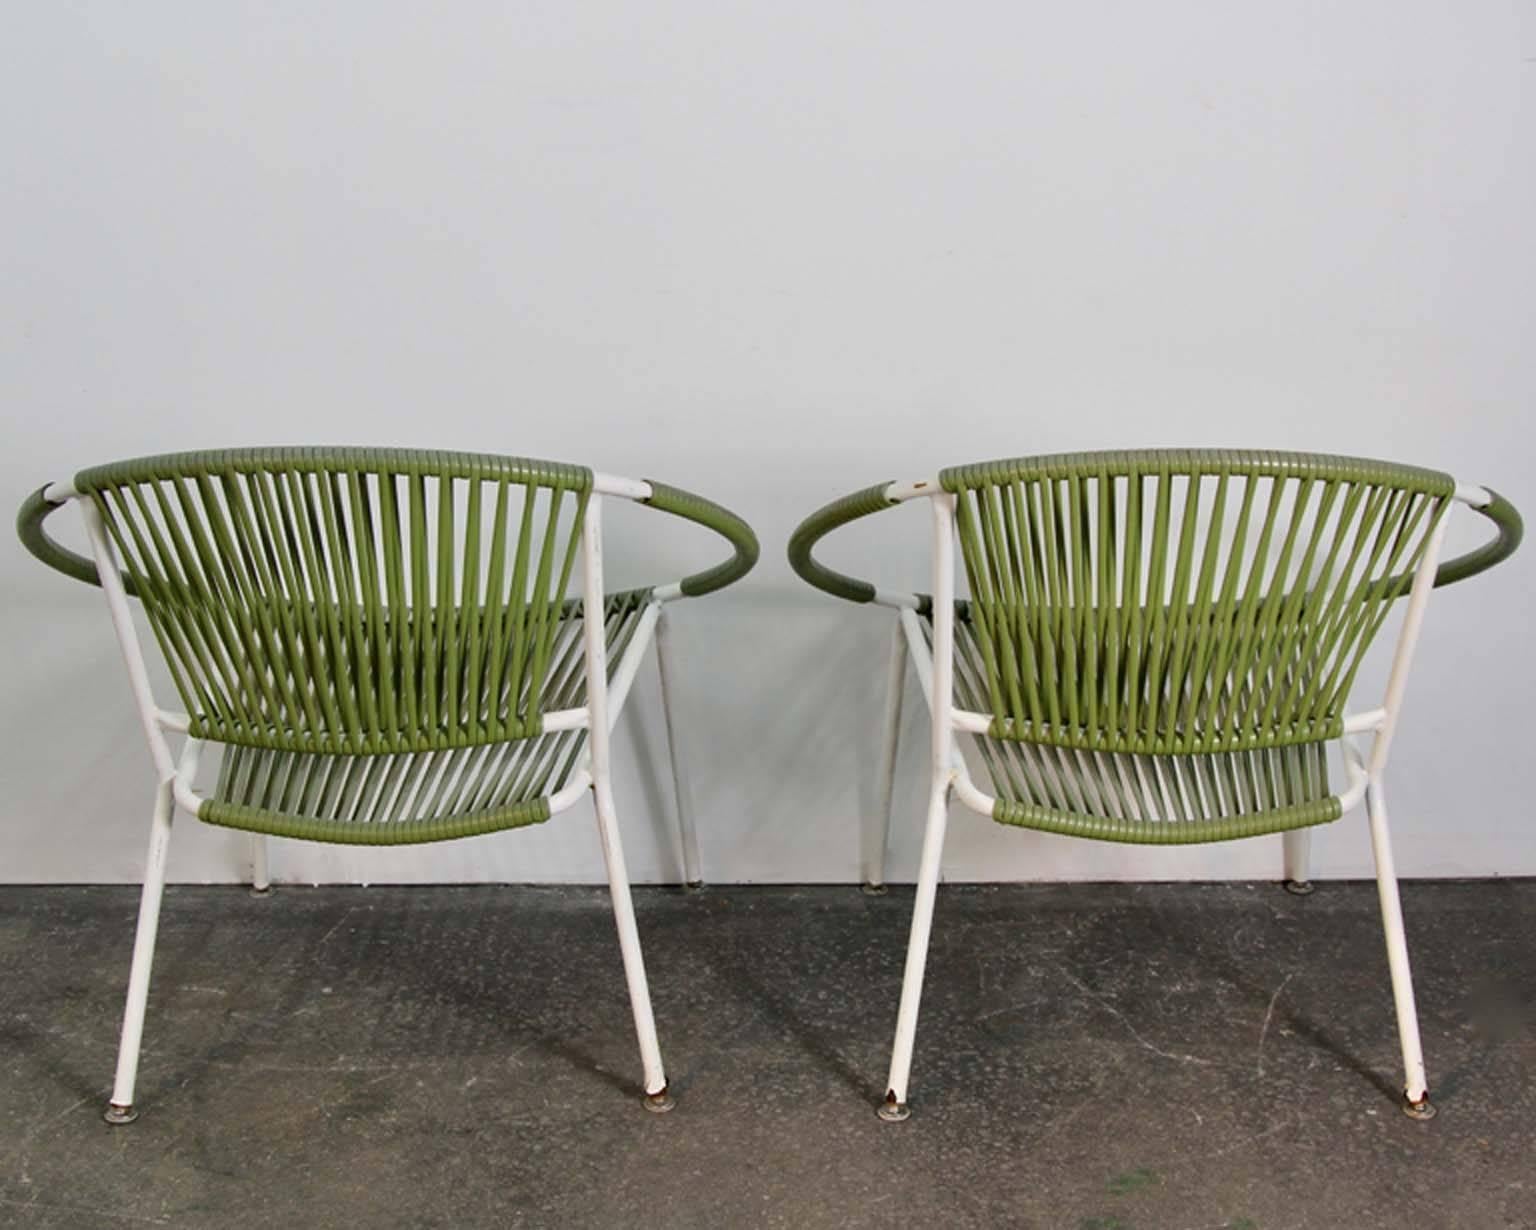 Modernist Pair of Hoop Chairs with Pebble Glass Snack Table Patio Set In Good Condition For Sale In Bridport, CT